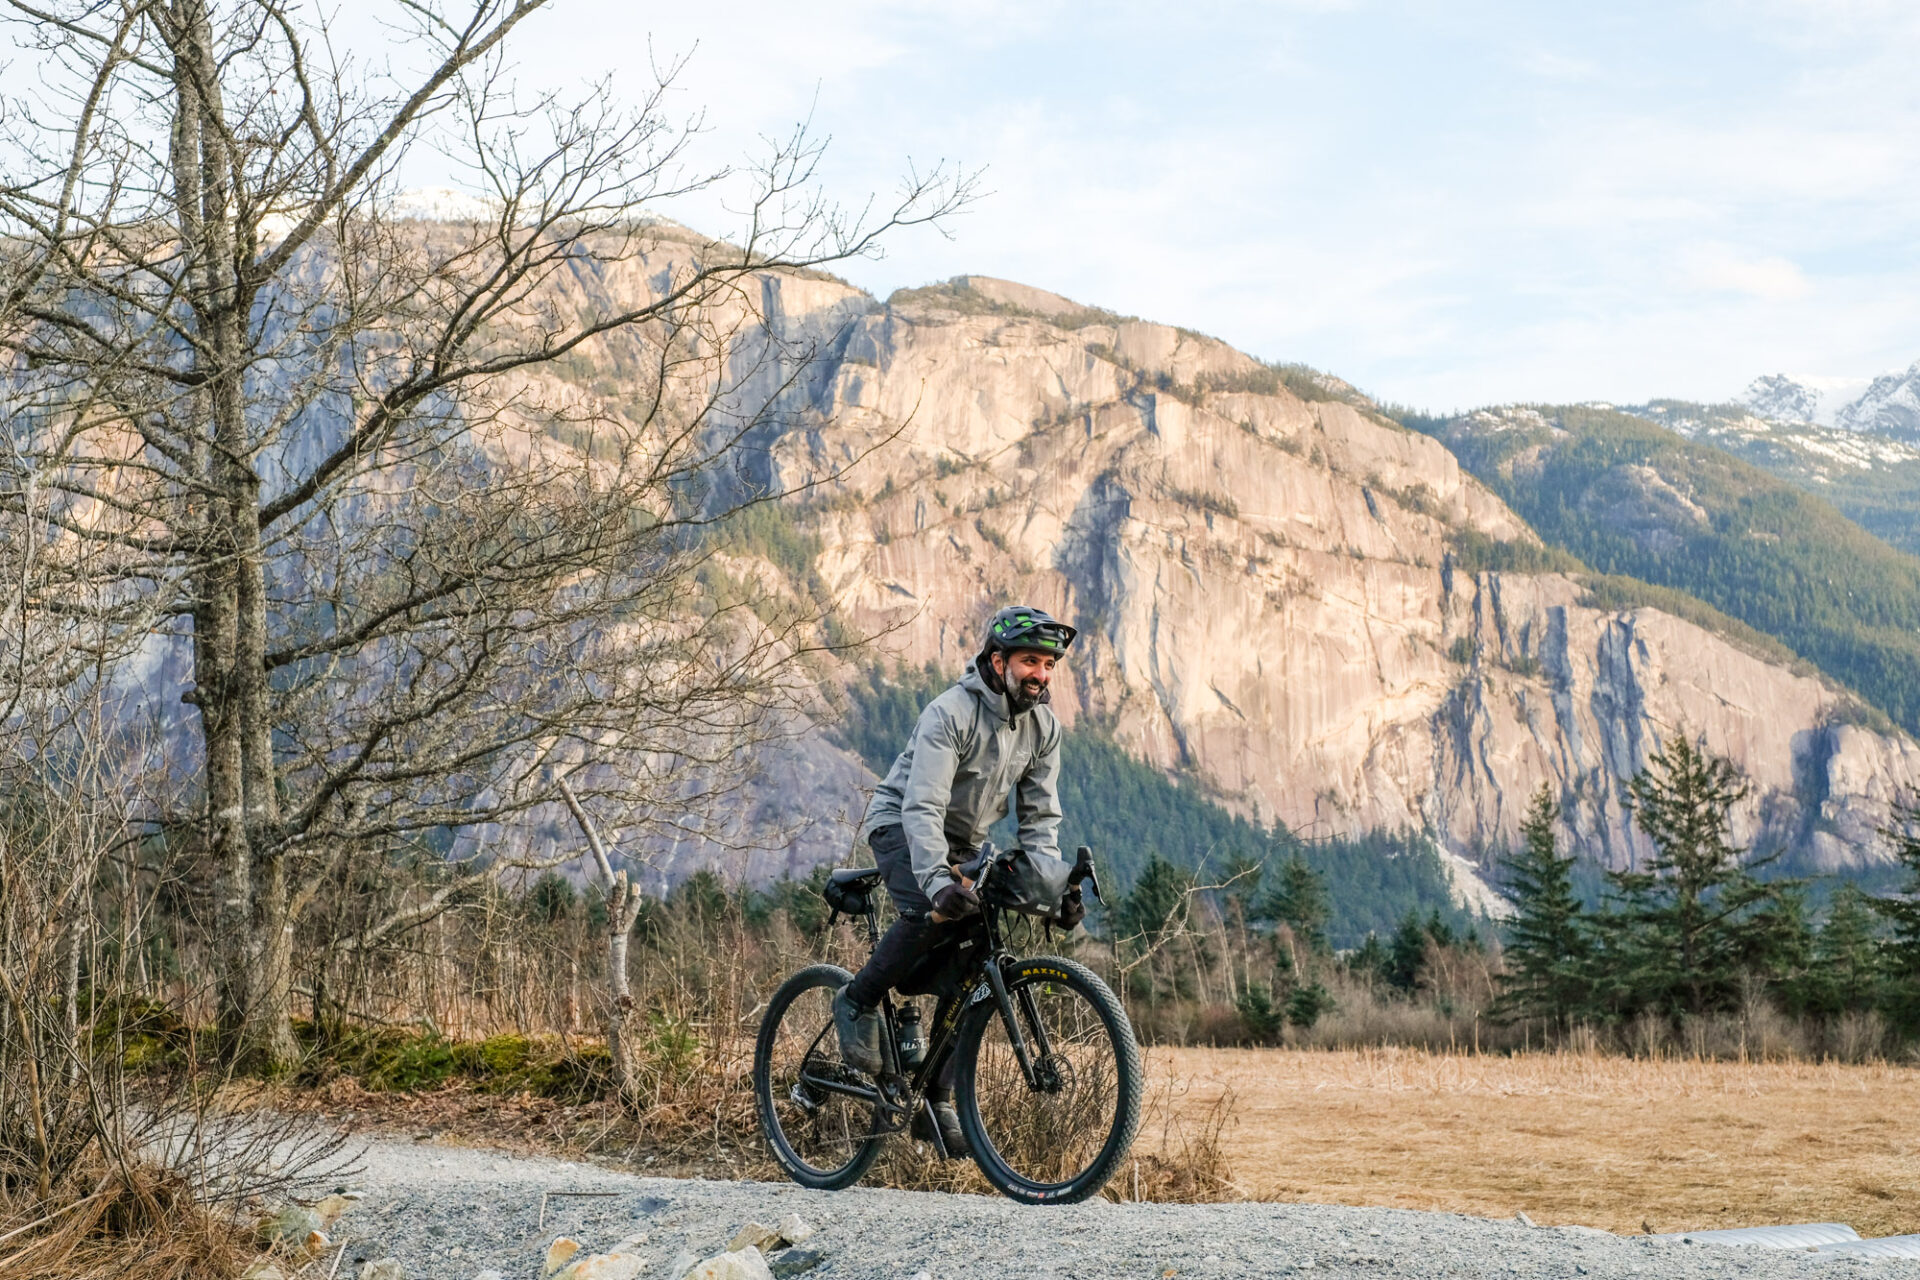 A man rides his bicycle on a rural path in Squamish with the Stawamus Chief mountain in the background.